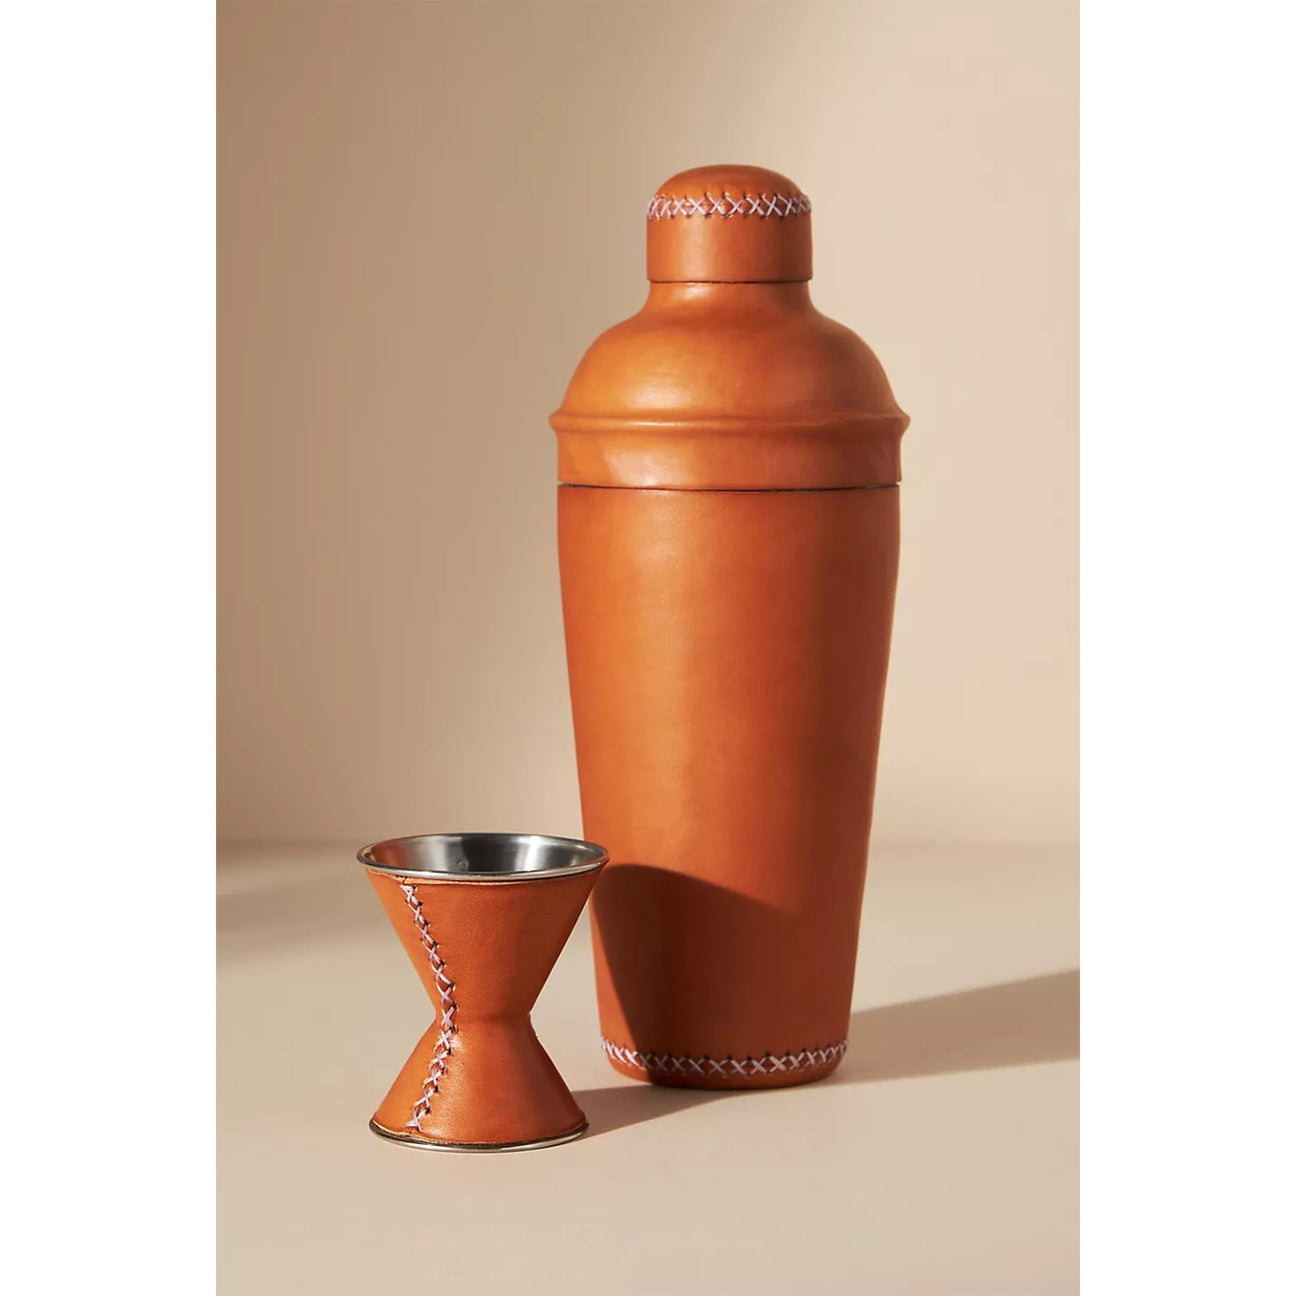 Leather Martini Shaker Set - Red